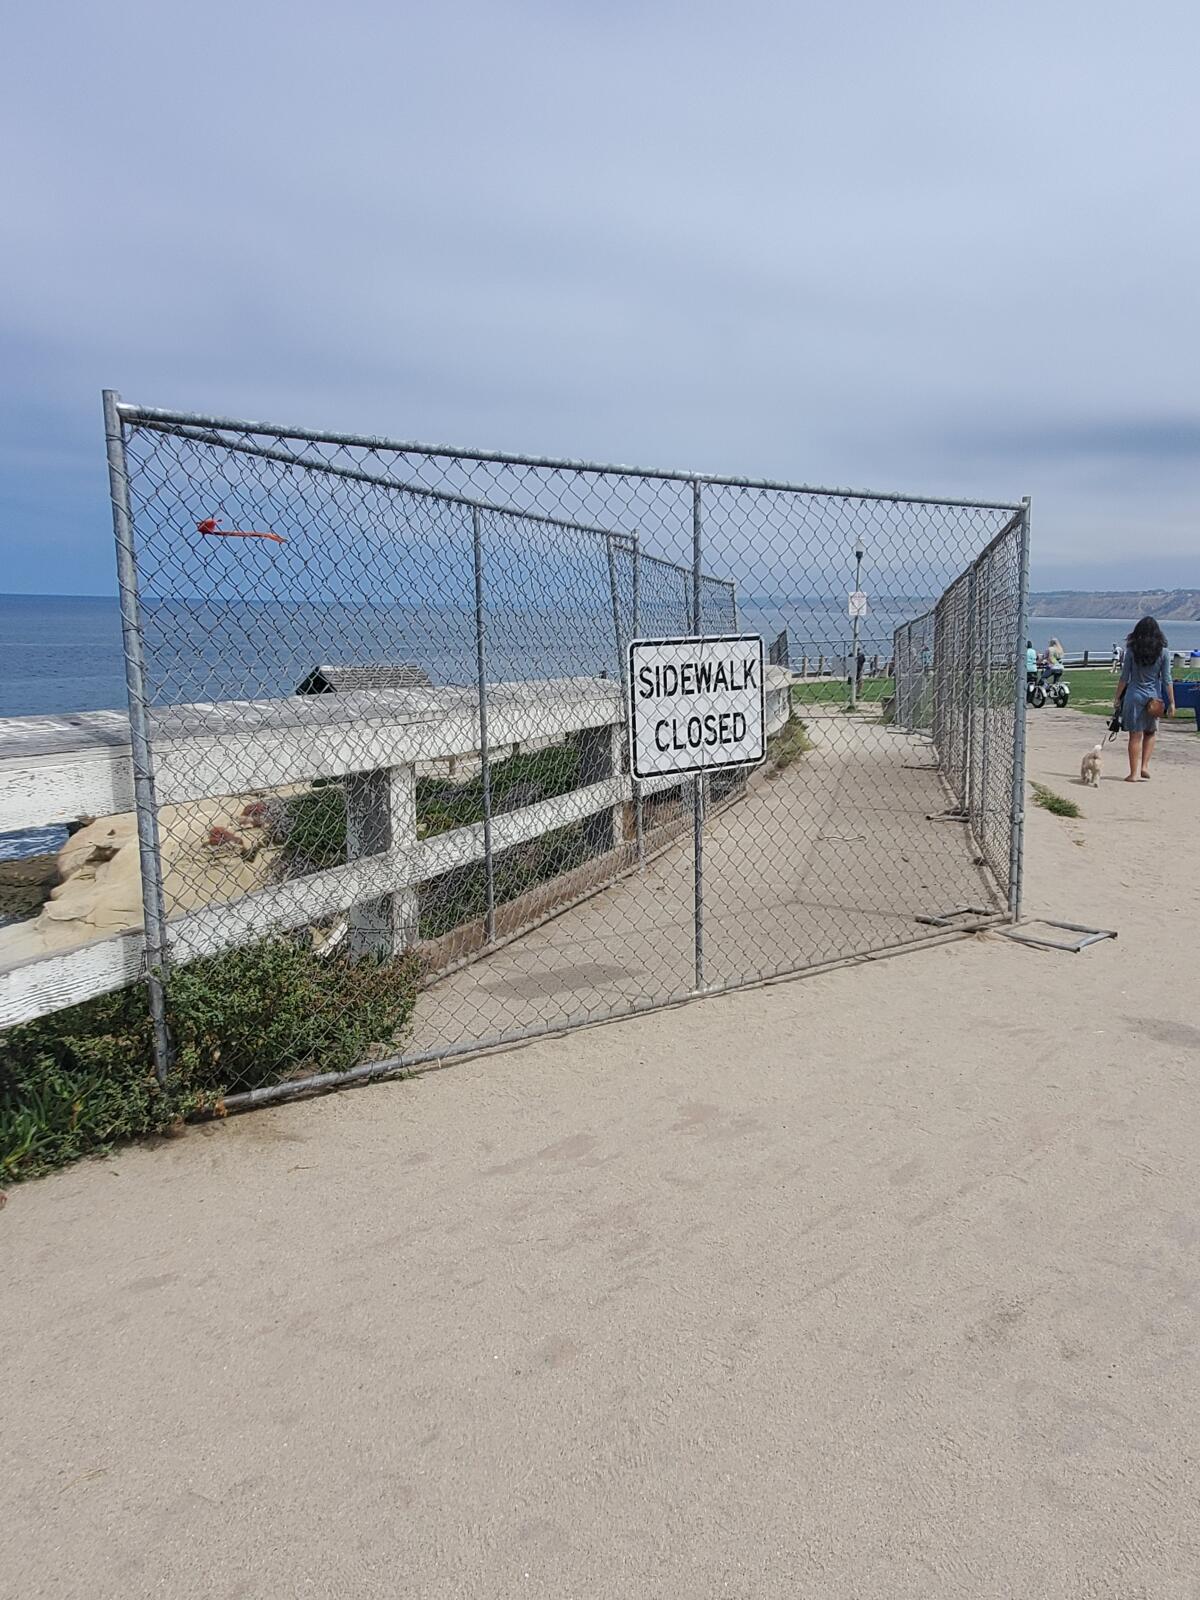 This fencing in Scripps Park will remain to keep people away from an eroding bluff.